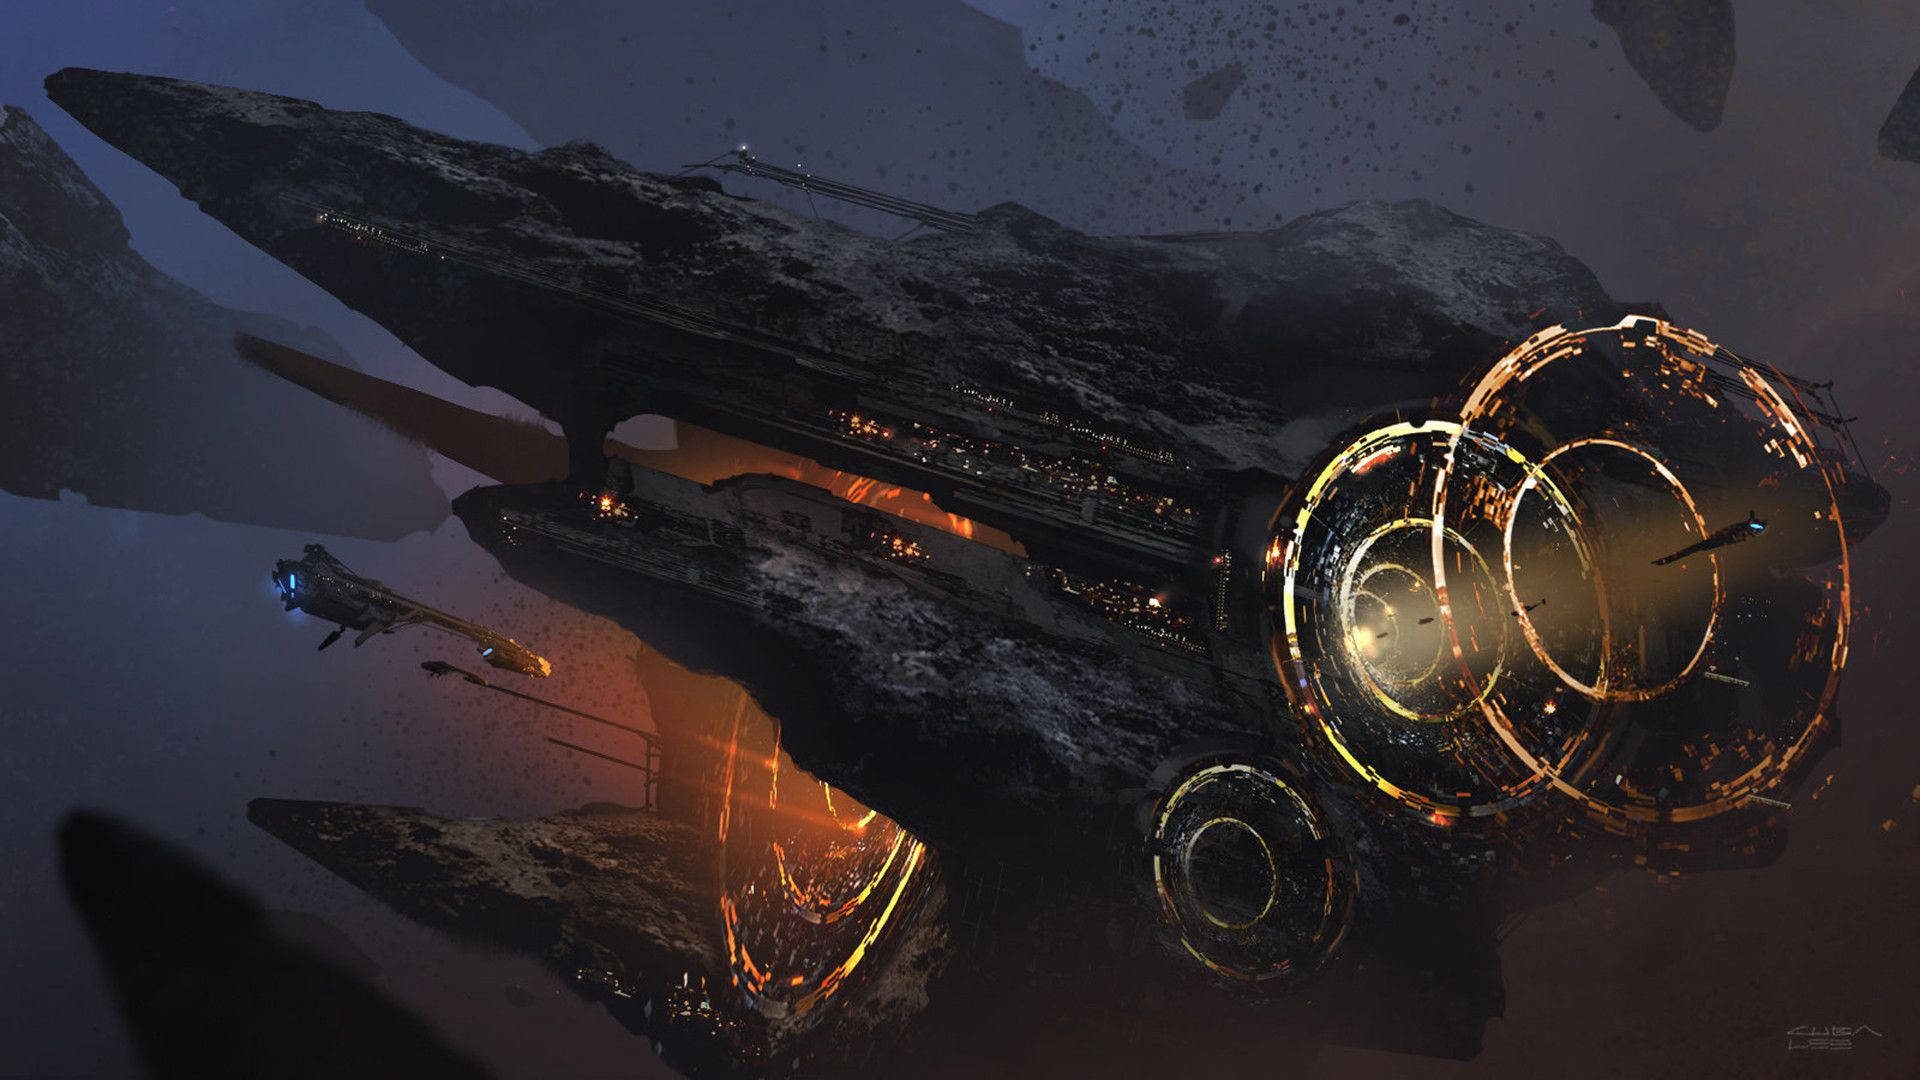 Explore the frontiers of space with this sci-fi spaceship. Wallpaper